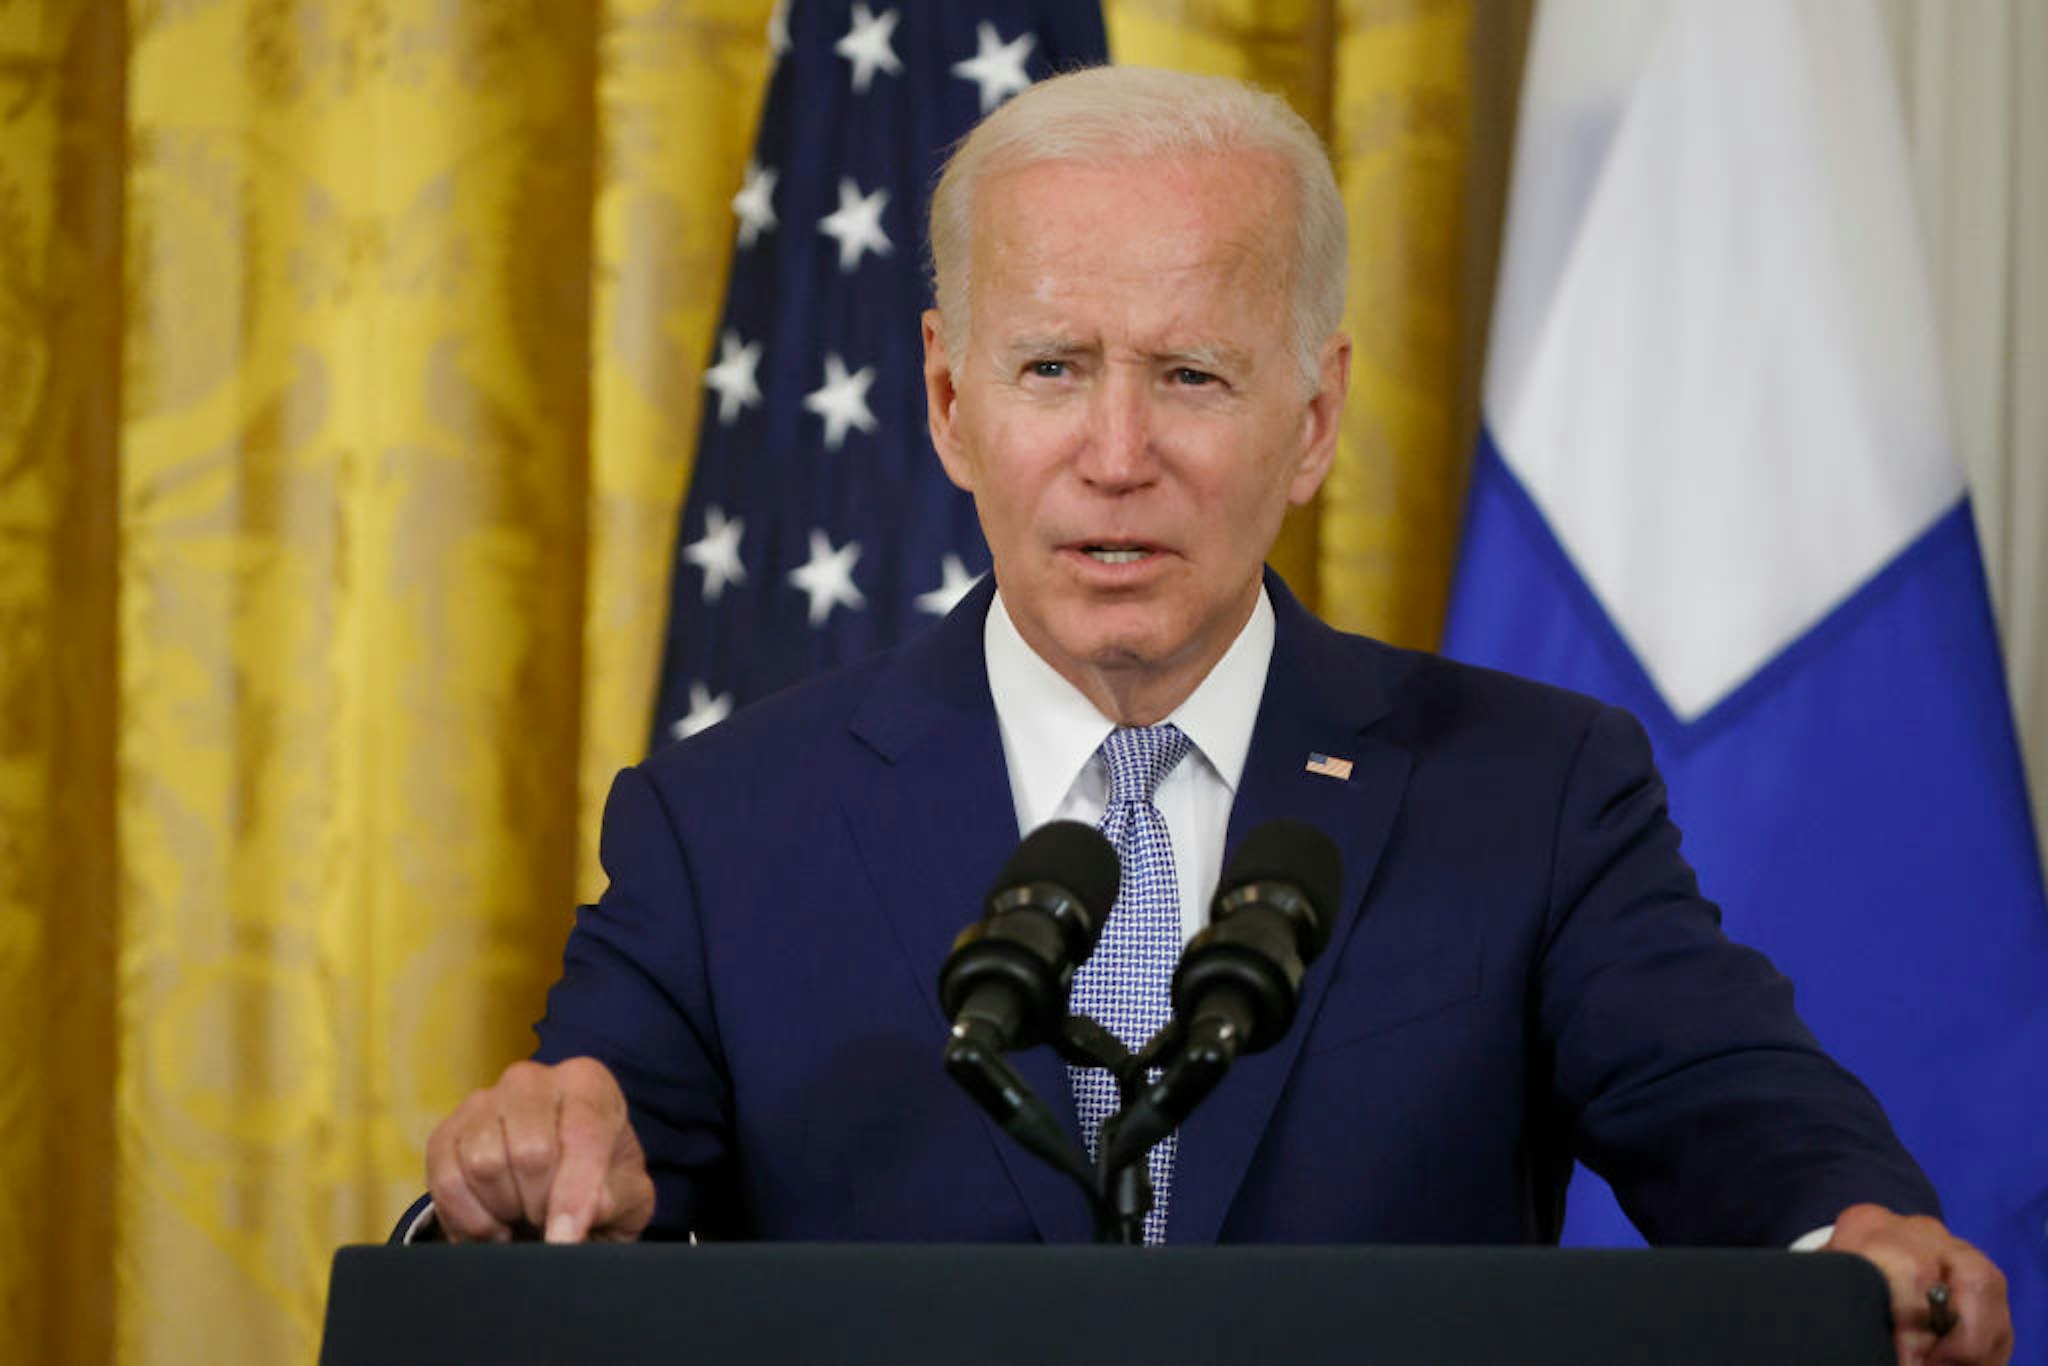 WASHINGTON, DC - AUGUST 09: U.S. President Joe Biden speaks before signing the agreement for Finland and Sweden to be included in the North Atlantic Treaty Organization (NATO) in the East Room of the White House on August 09, 2022 in Washington, DC. Following Russia's invasion of Ukraine, the Republic of Finland and Kingdom of Sweden applied for membership in the Cold War-era military alliance.